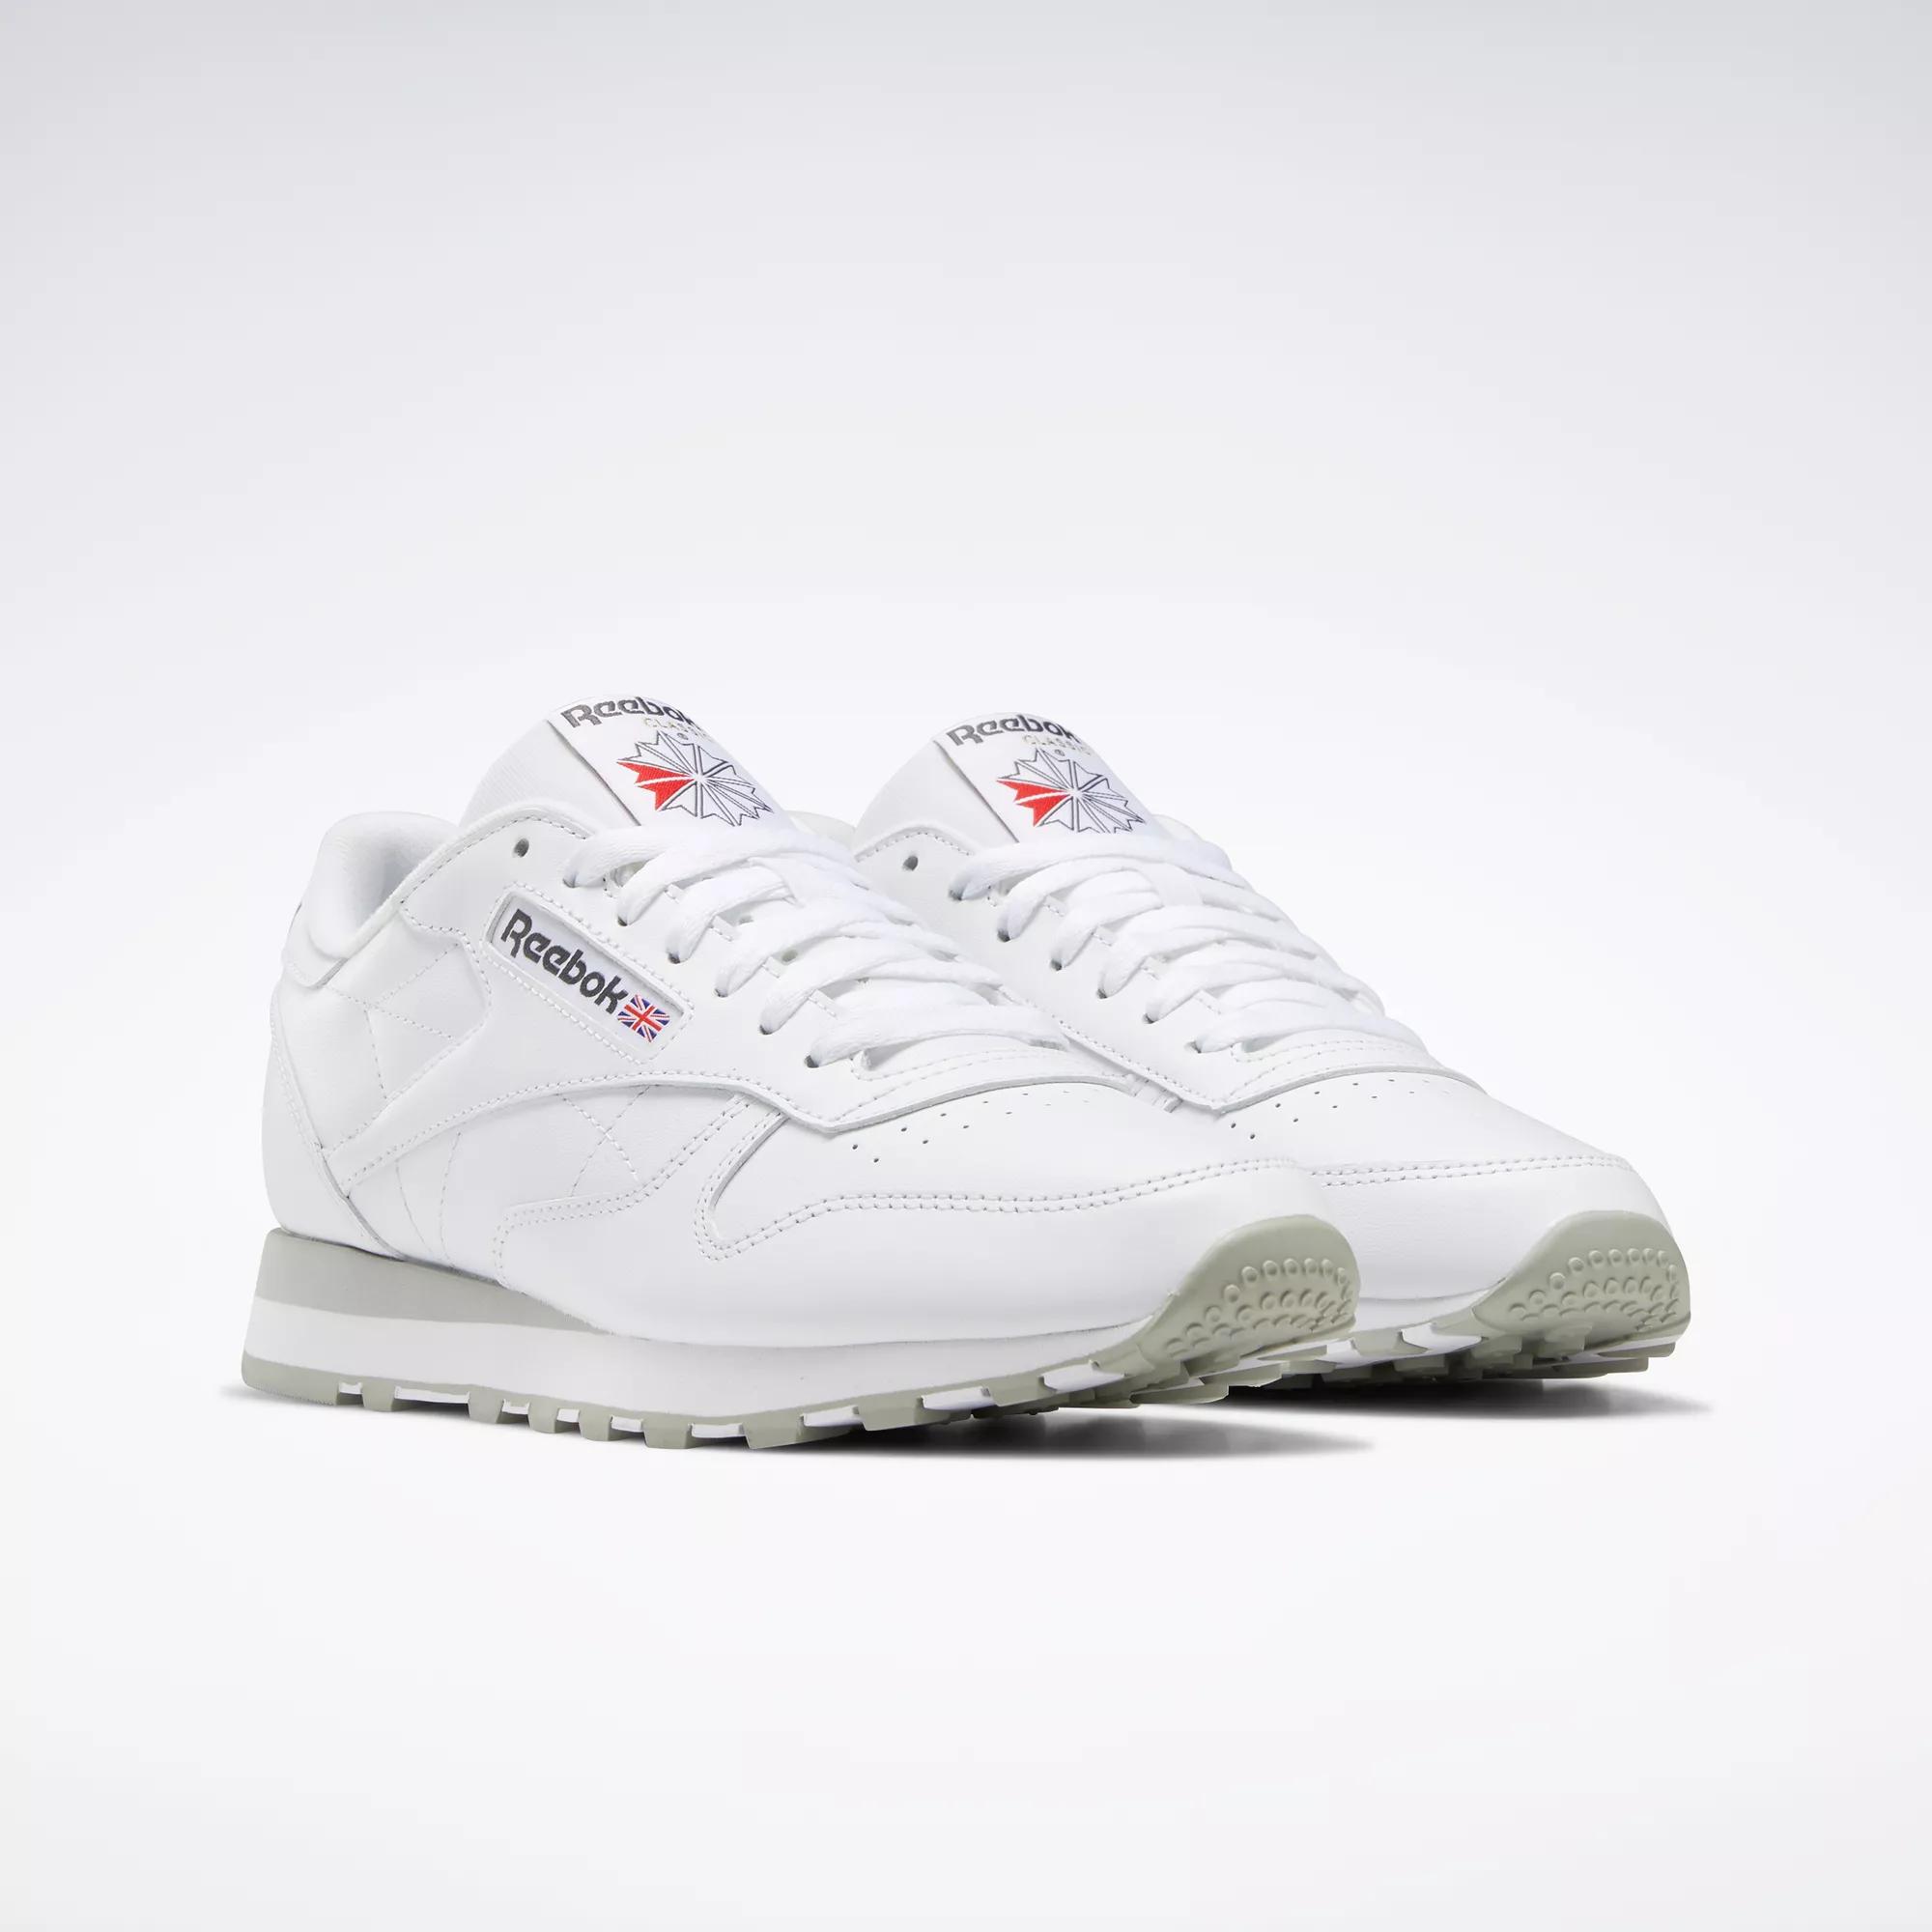 Classic Leather Shoes - Ftwr White / Pure Grey 3 / Pure Grey Reebok